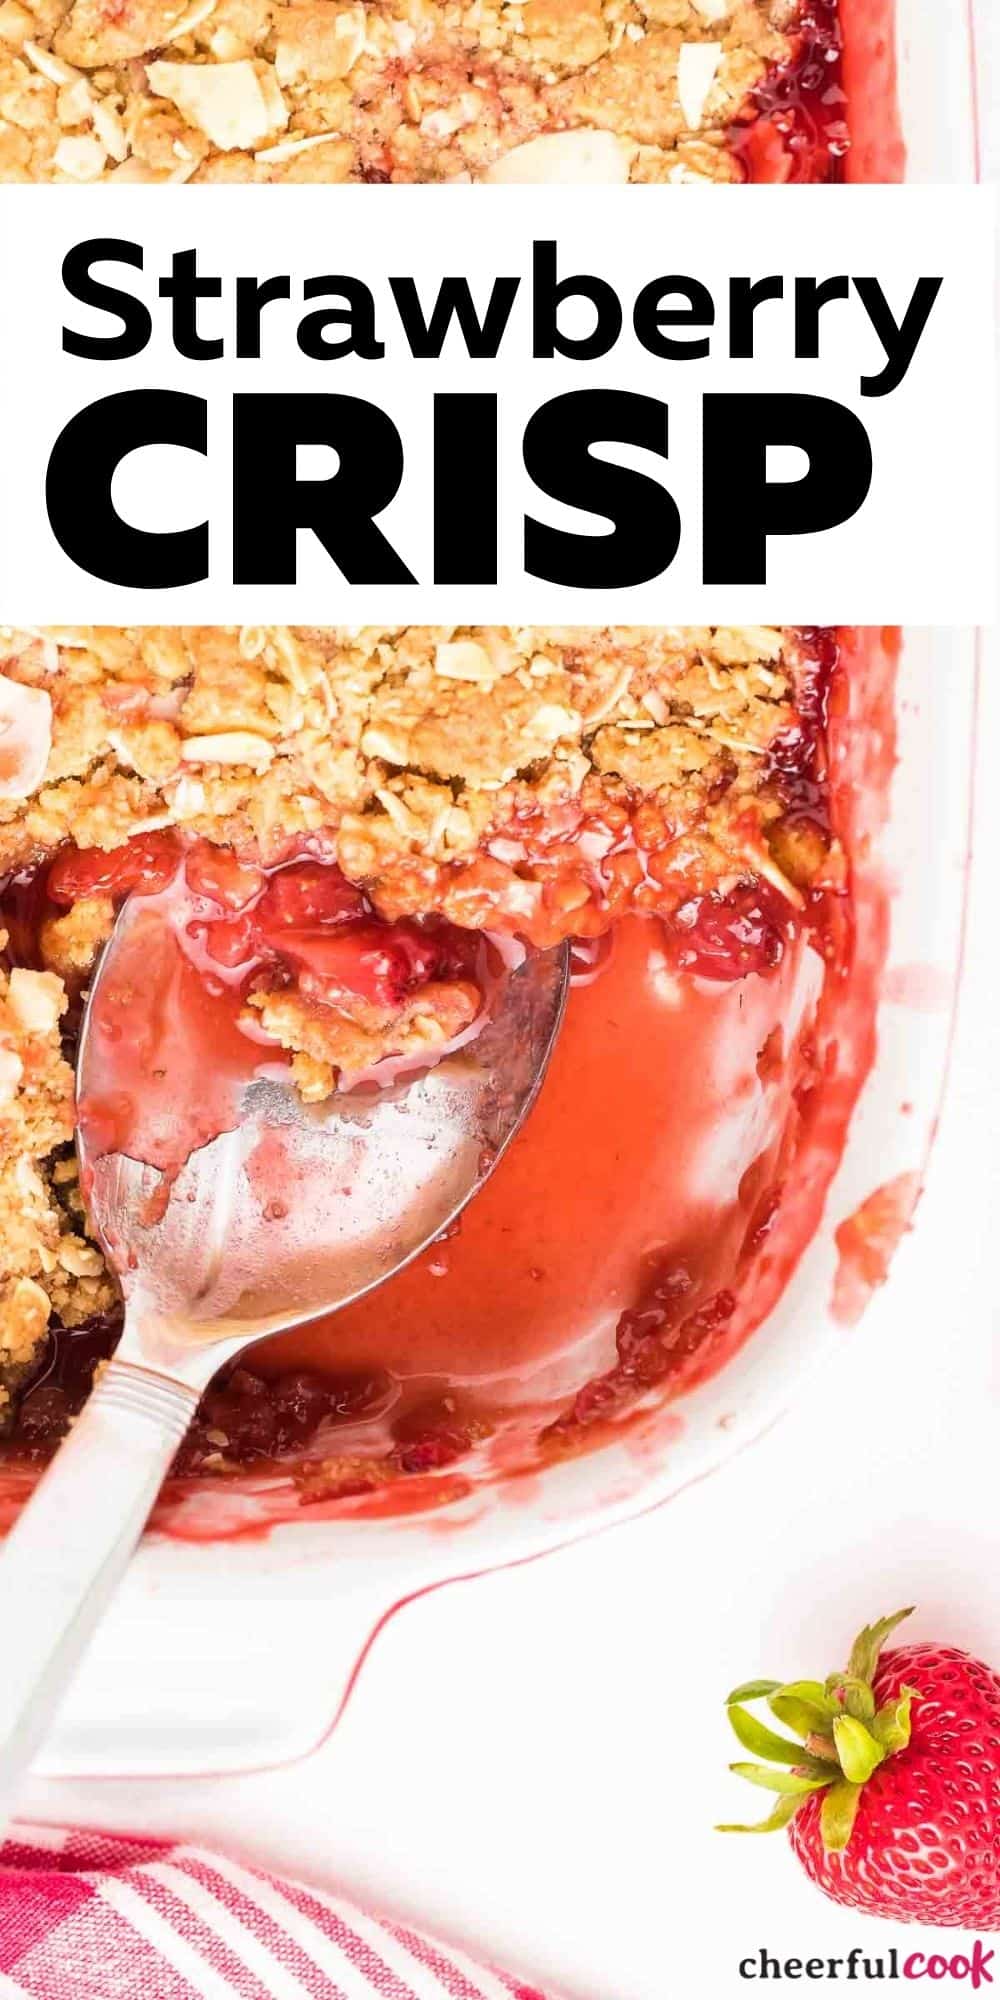 Easy Strawberry Crisp is the perfect summer dessert, especially when it's made with freshly picked, in-season strawberries. You'll need 7 simple everyday ingredients you'll most likely already have in your fridge and pantry. #cheerfulcook #strawberrycrisp #crisp #crumble #dessert  via @cheerfulcook